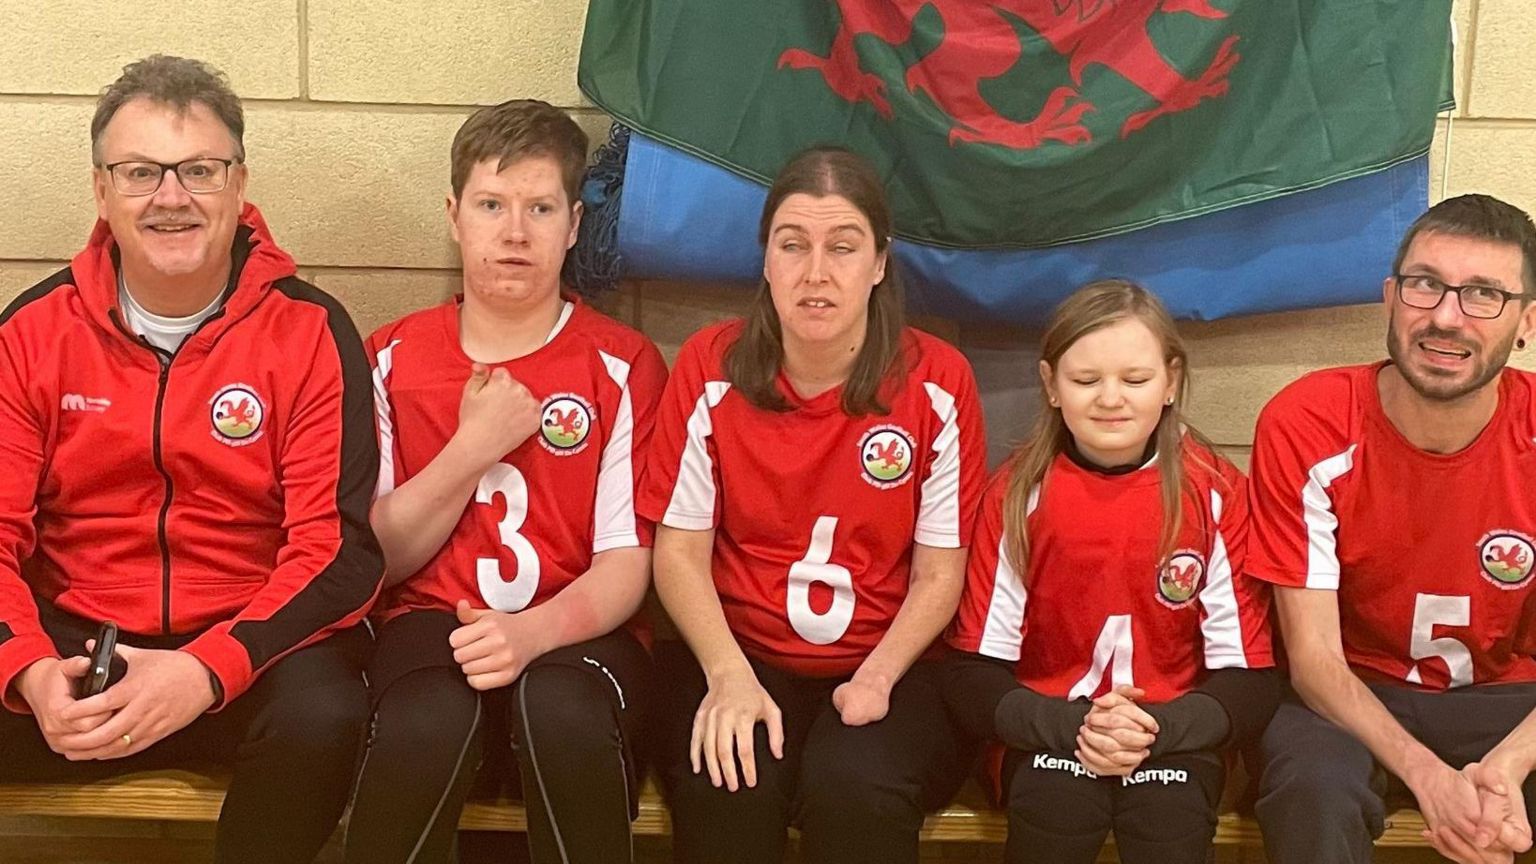 South Wales Goalball Team